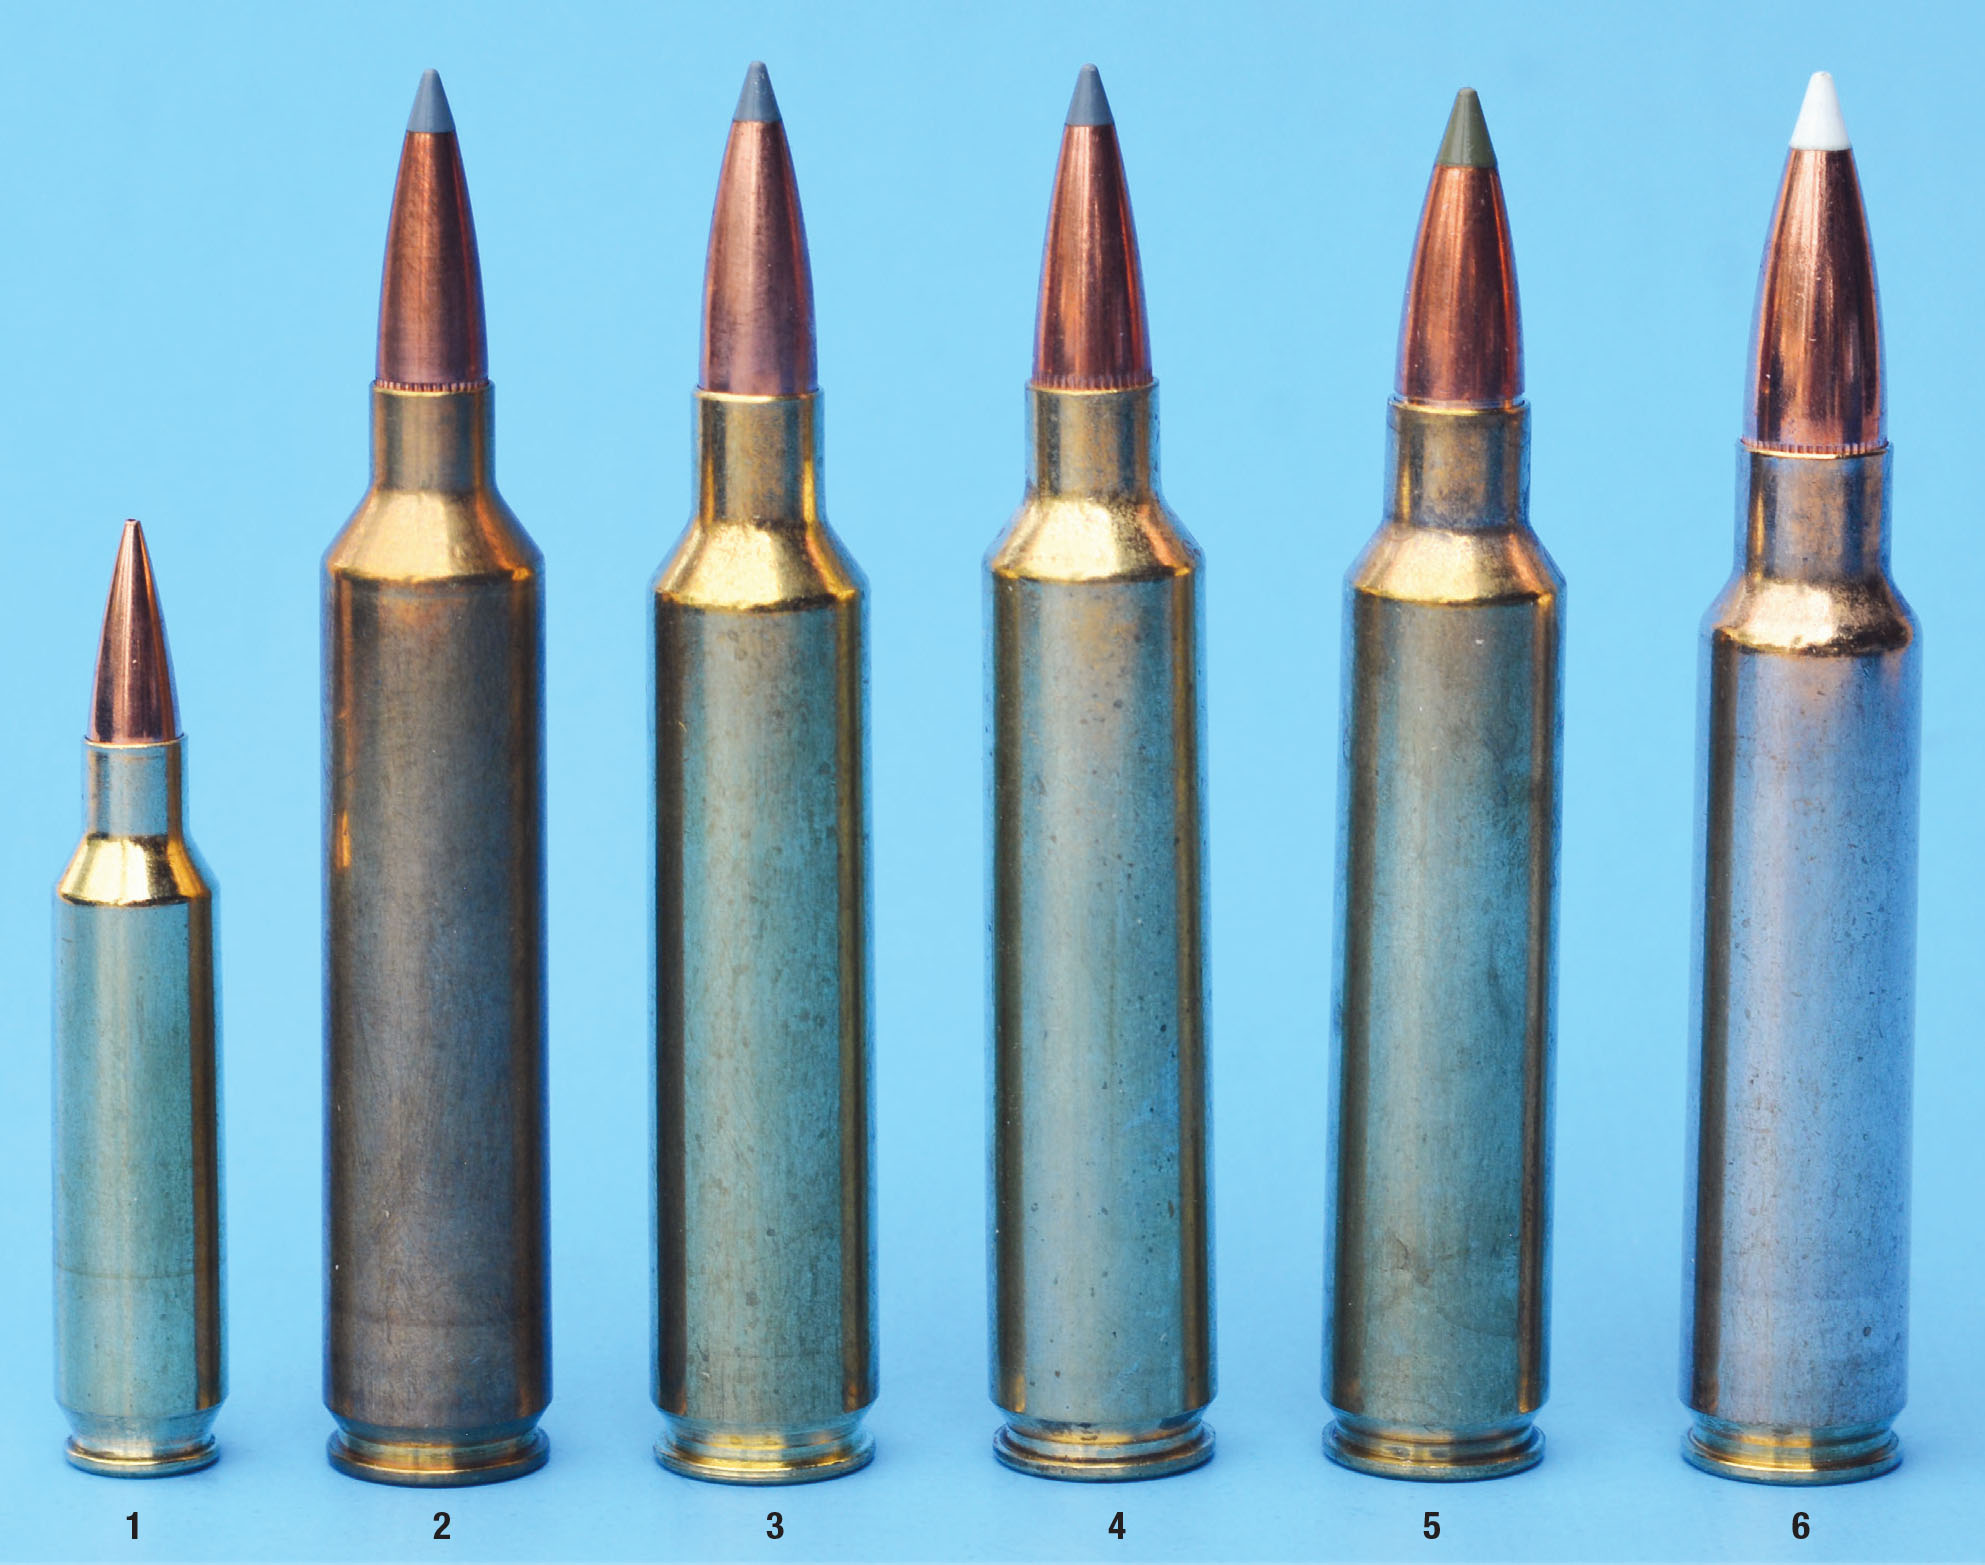 Nosler cartridges include the (1) .22, (2) .26, (3) .27, (4) .28, (5) .30 and (6) .33 Nosler. While the .22 was designed primarily for AR-pattern rifles, it makes a fine bolt-action cartridge. The remaining Nosler cartridges are based on the .300 Remington Ultra Magnum case, but with a 35-degree shoulder and with a shorter overall length of 3.340 inches, they will function in rifles with a .30-06-length action.